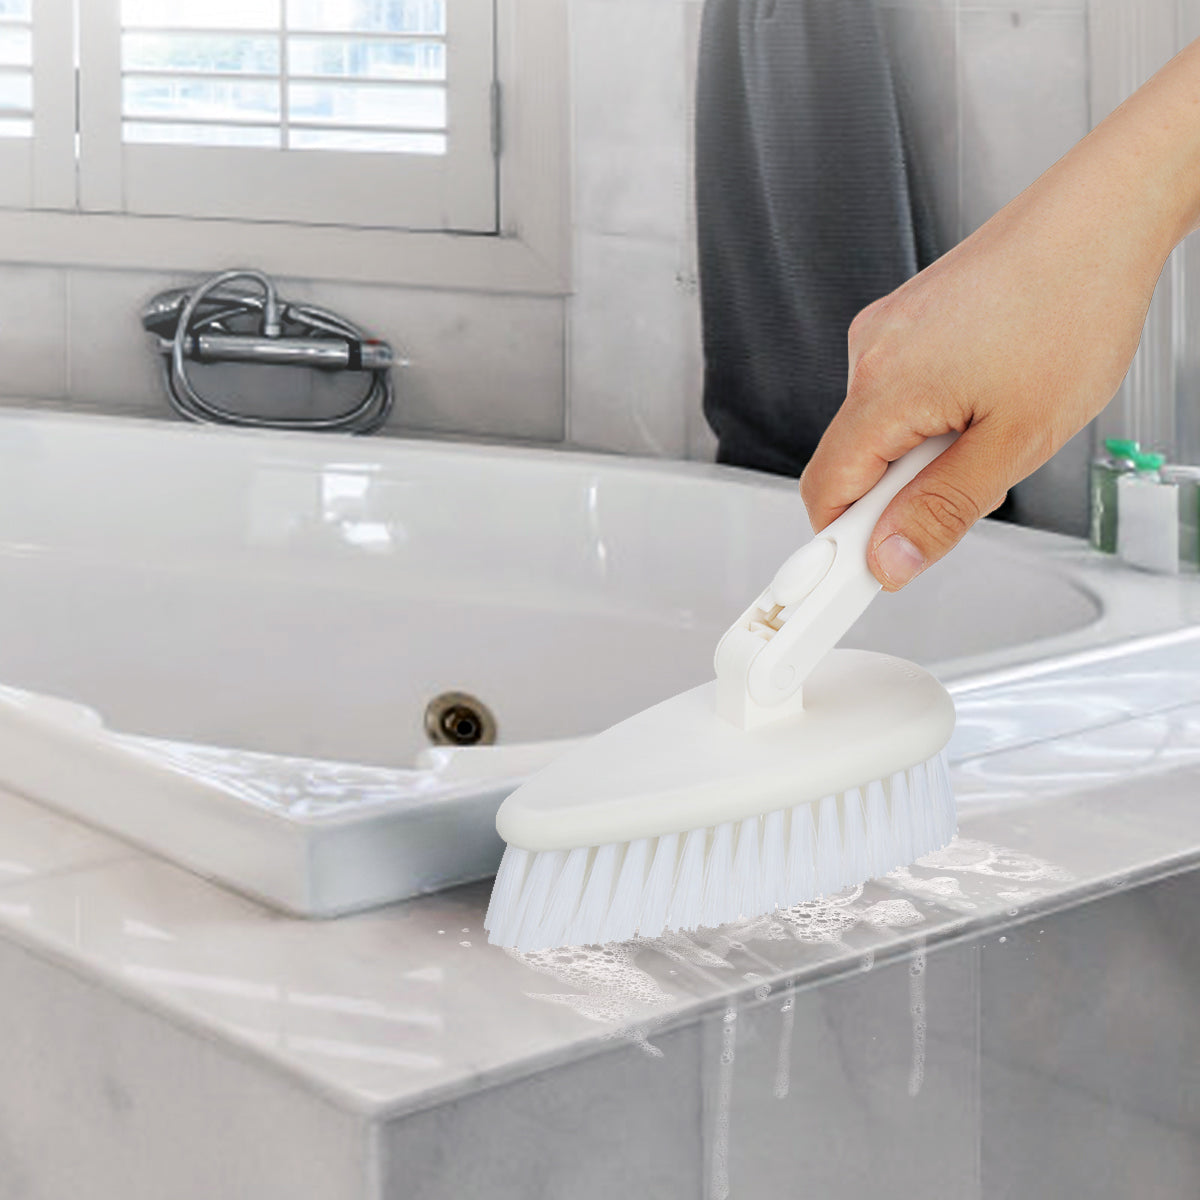 Qaestfy Shower Scrubber & Cleaning Brush Combo Tub and Tile